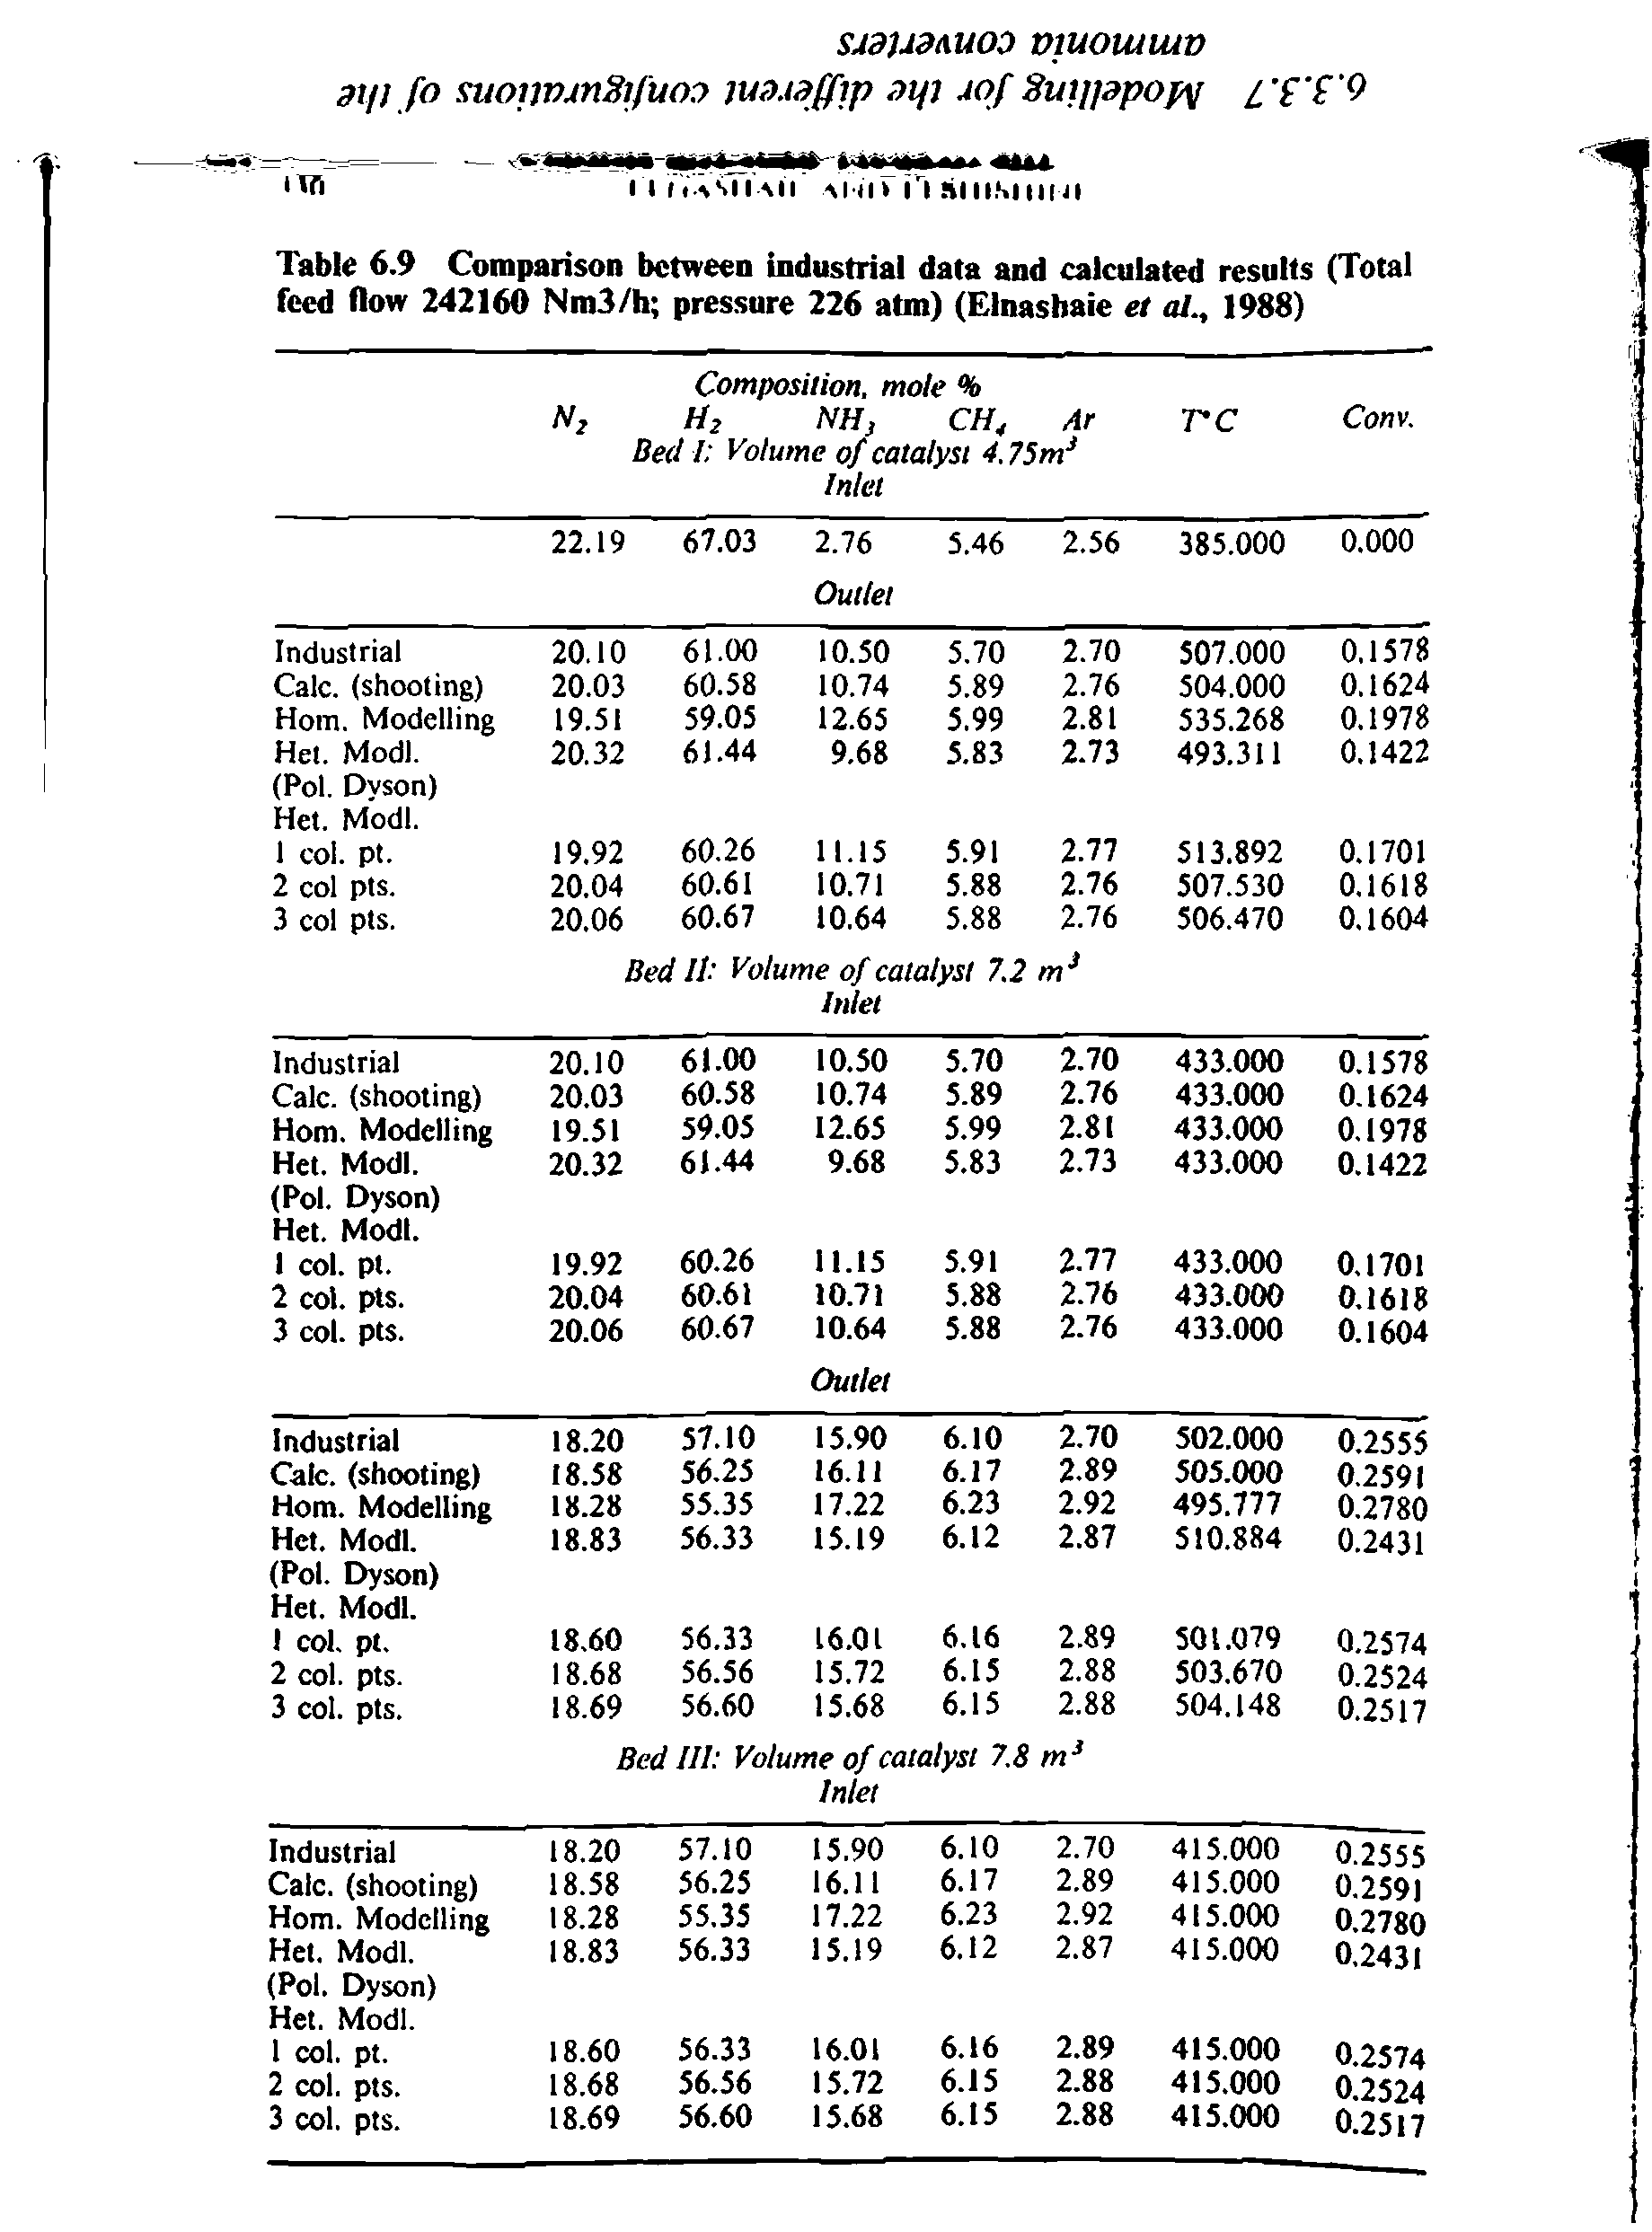 Table 6.9 Comparison between industrial data and calculated results (Total feed flow 242160 Nm3/h pressure 226 atm) (Elnasbaie et al., 1988)...